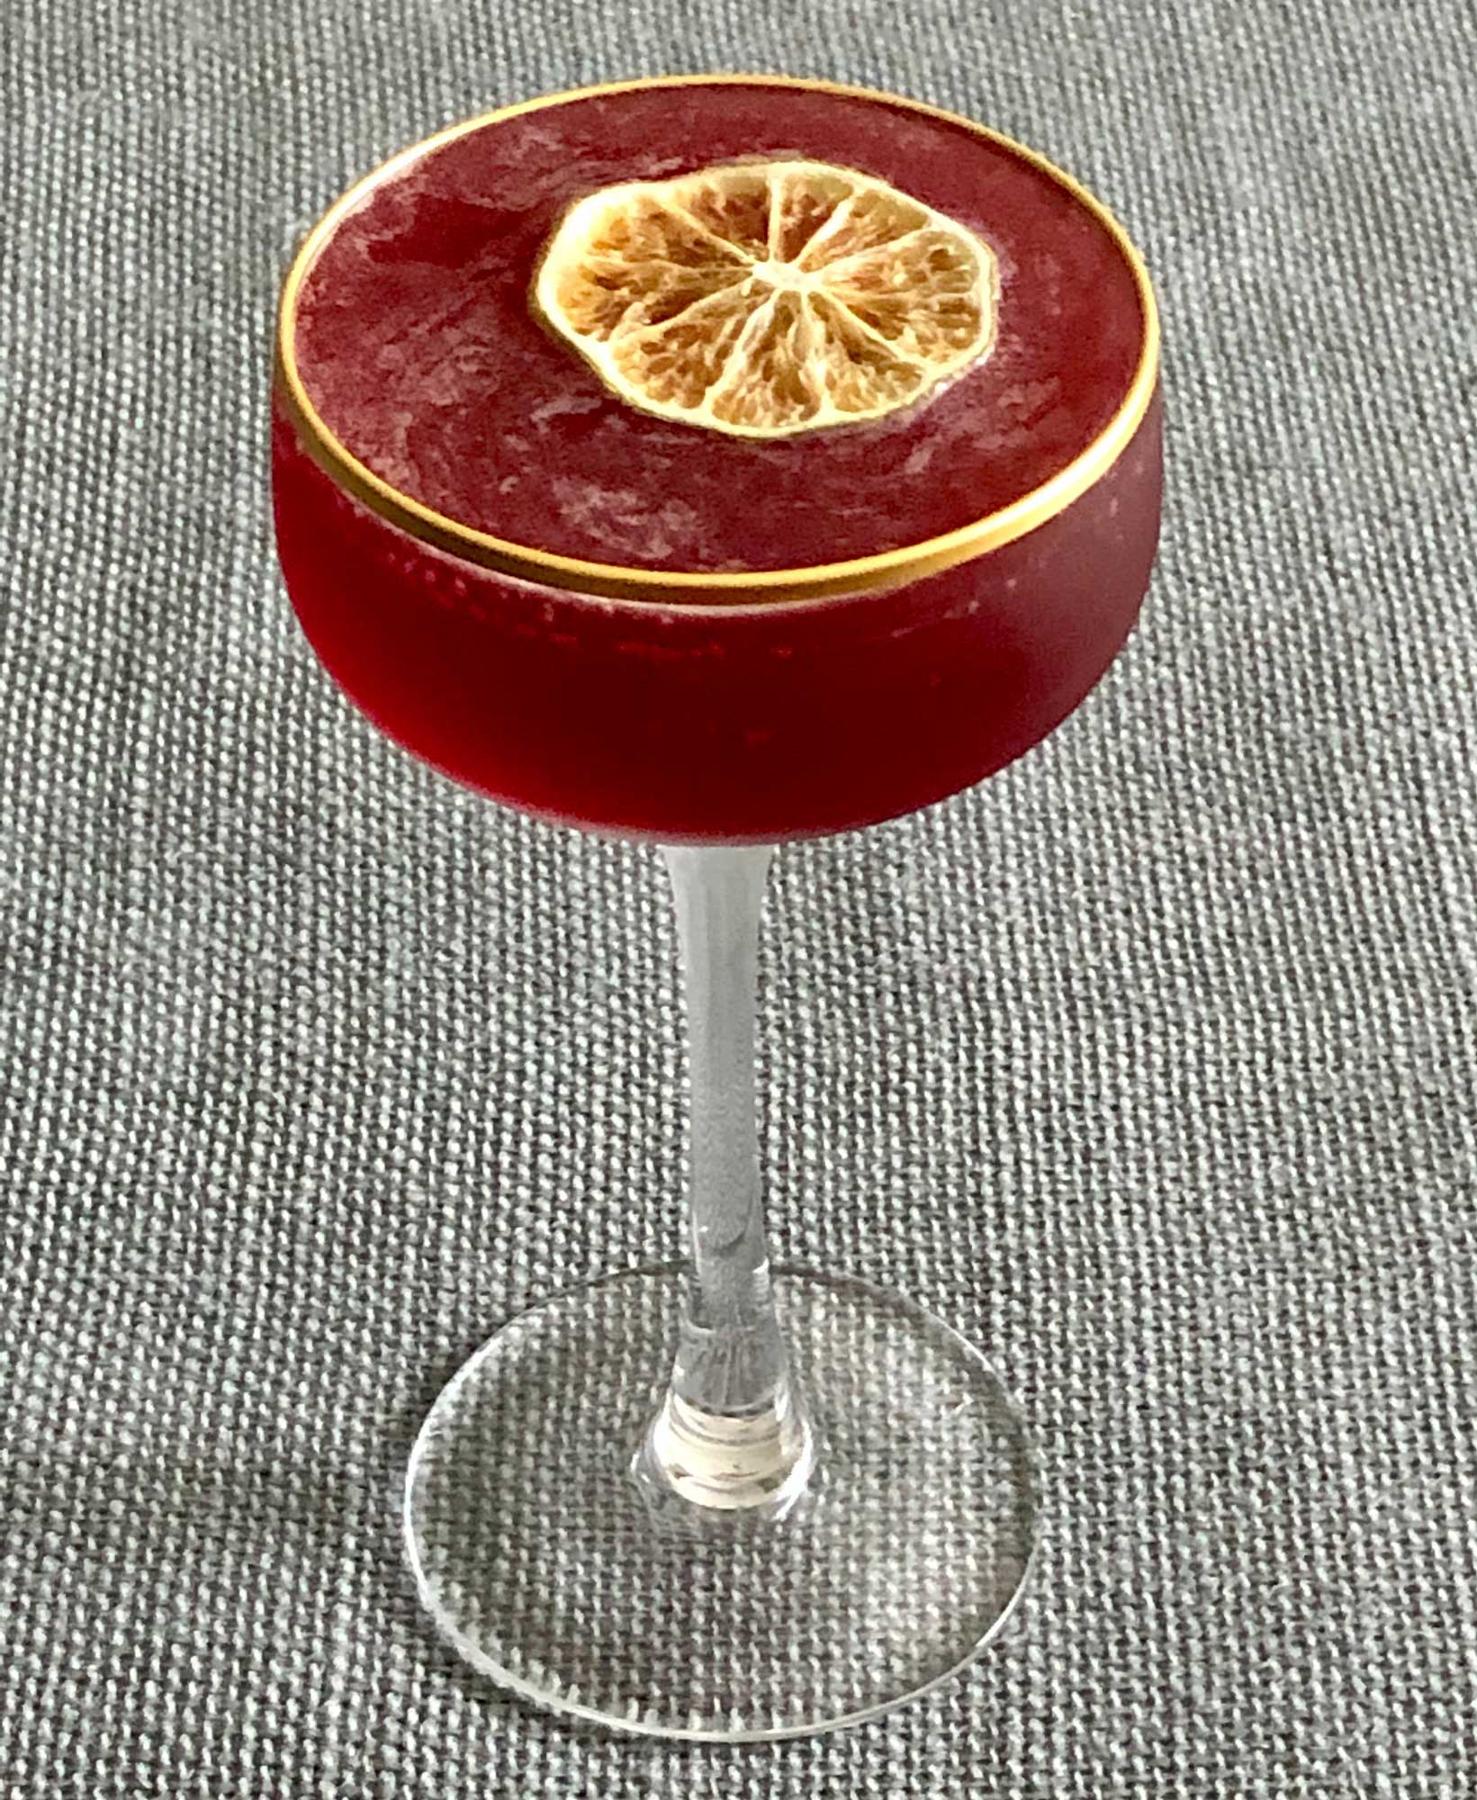 An example of the Continental Daiquiri, the mixed drink (drink) featuring light cuban-style rum, Rothman & Winter Orchard Elderberry Liqueur, lemon juice, lime juice, rich simple syrup, and lime wheel; photo by Lee Edwards